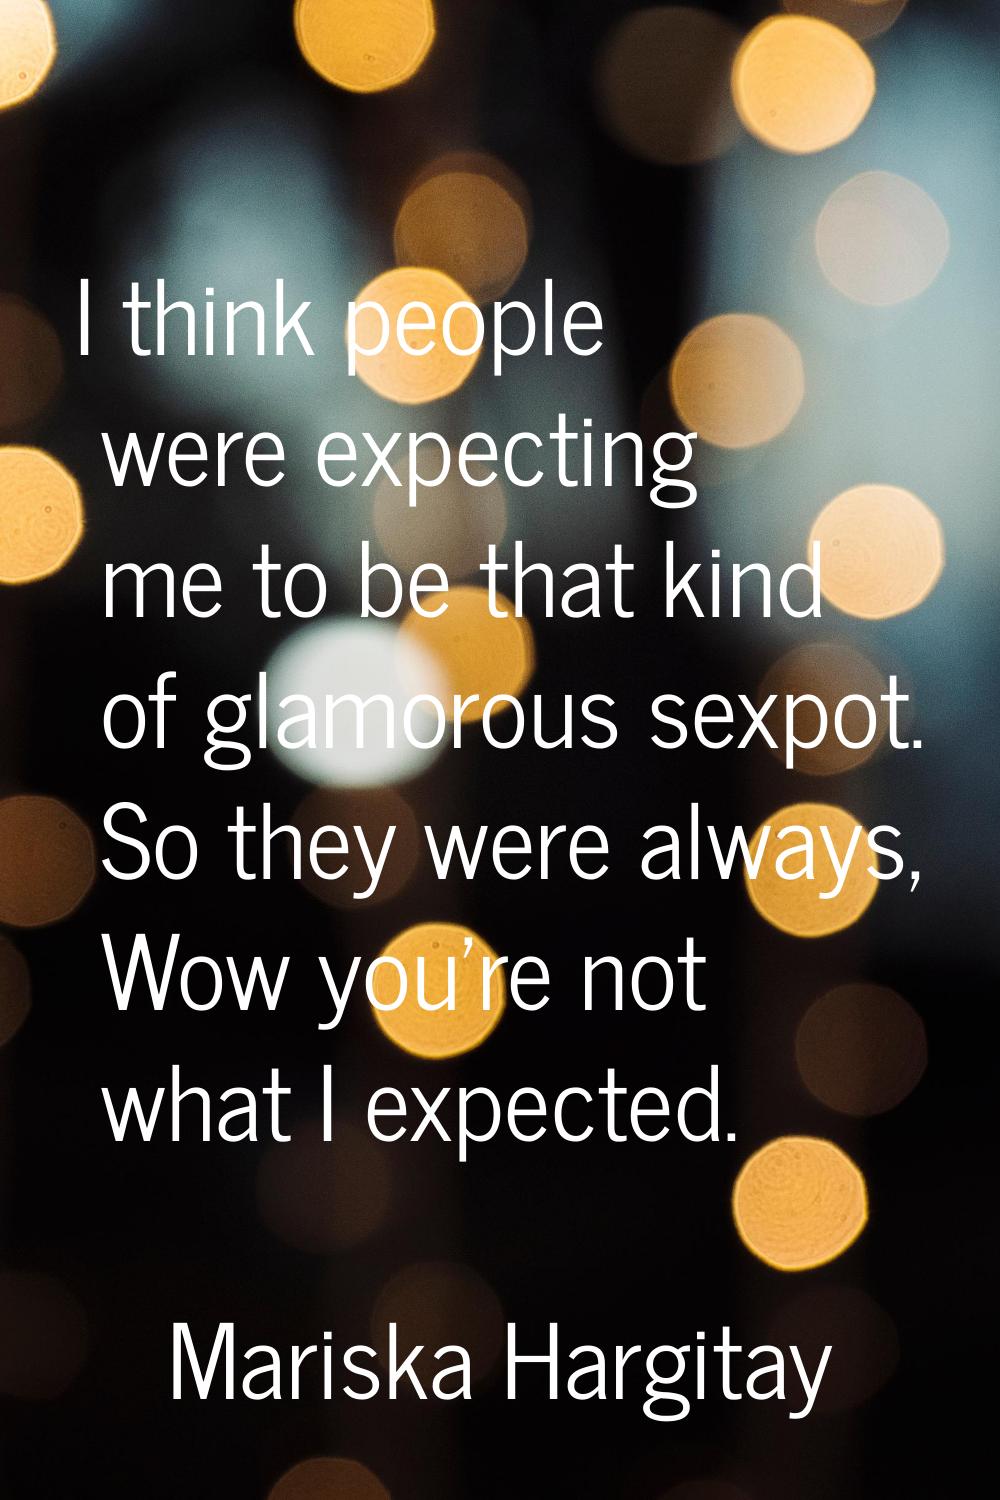 I think people were expecting me to be that kind of glamorous sexpot. So they were always, Wow you'